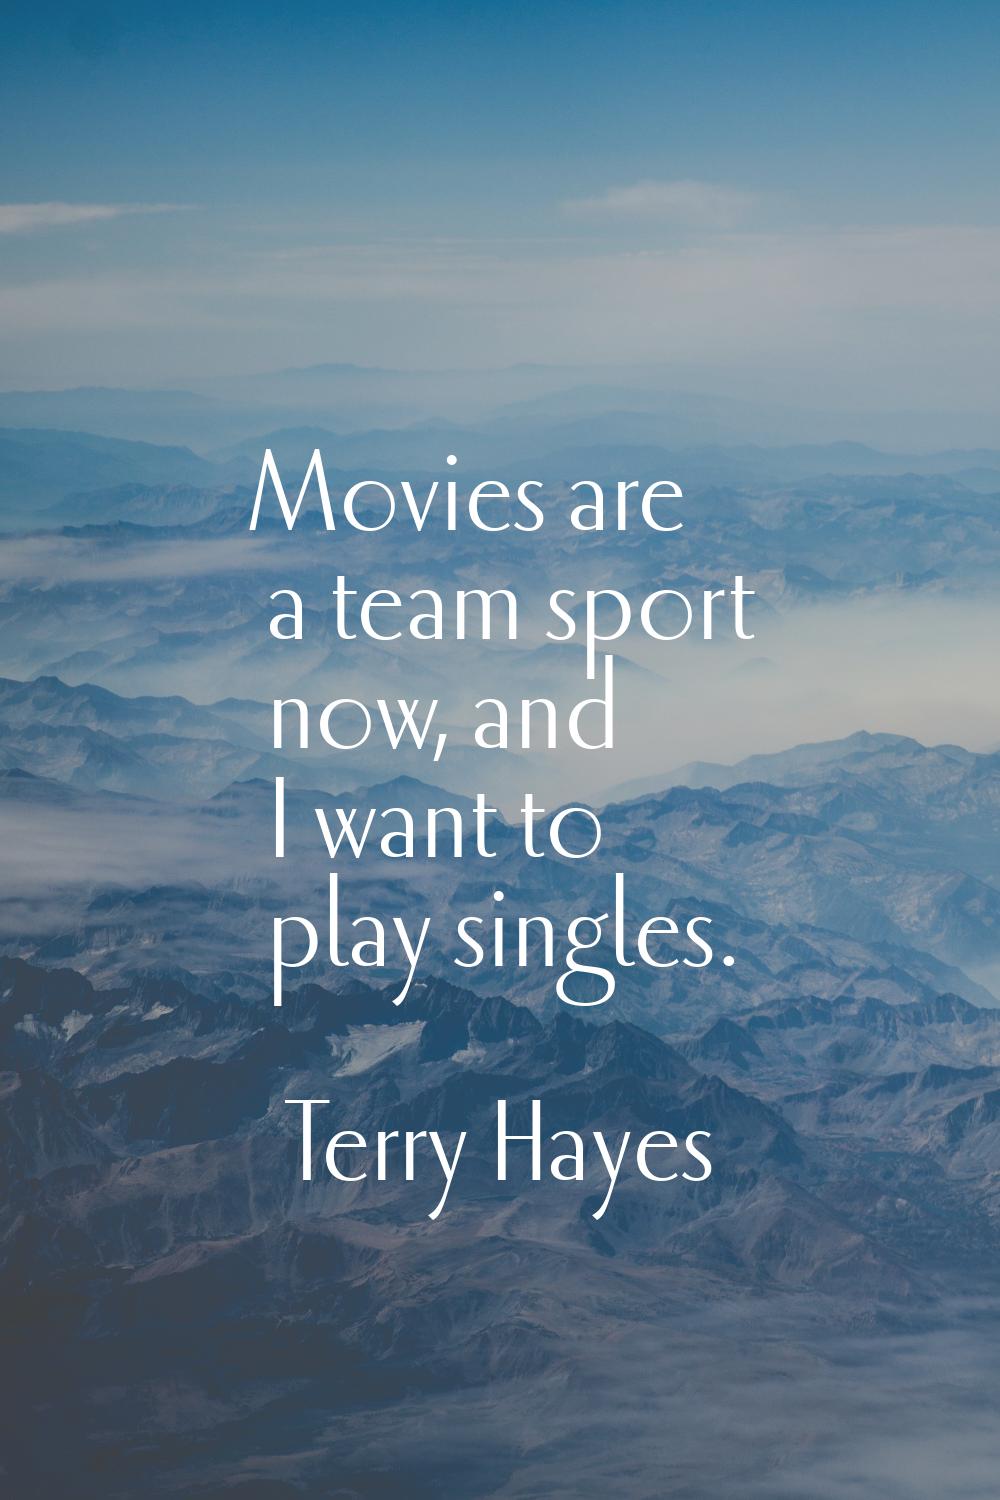 Movies are a team sport now, and I want to play singles.